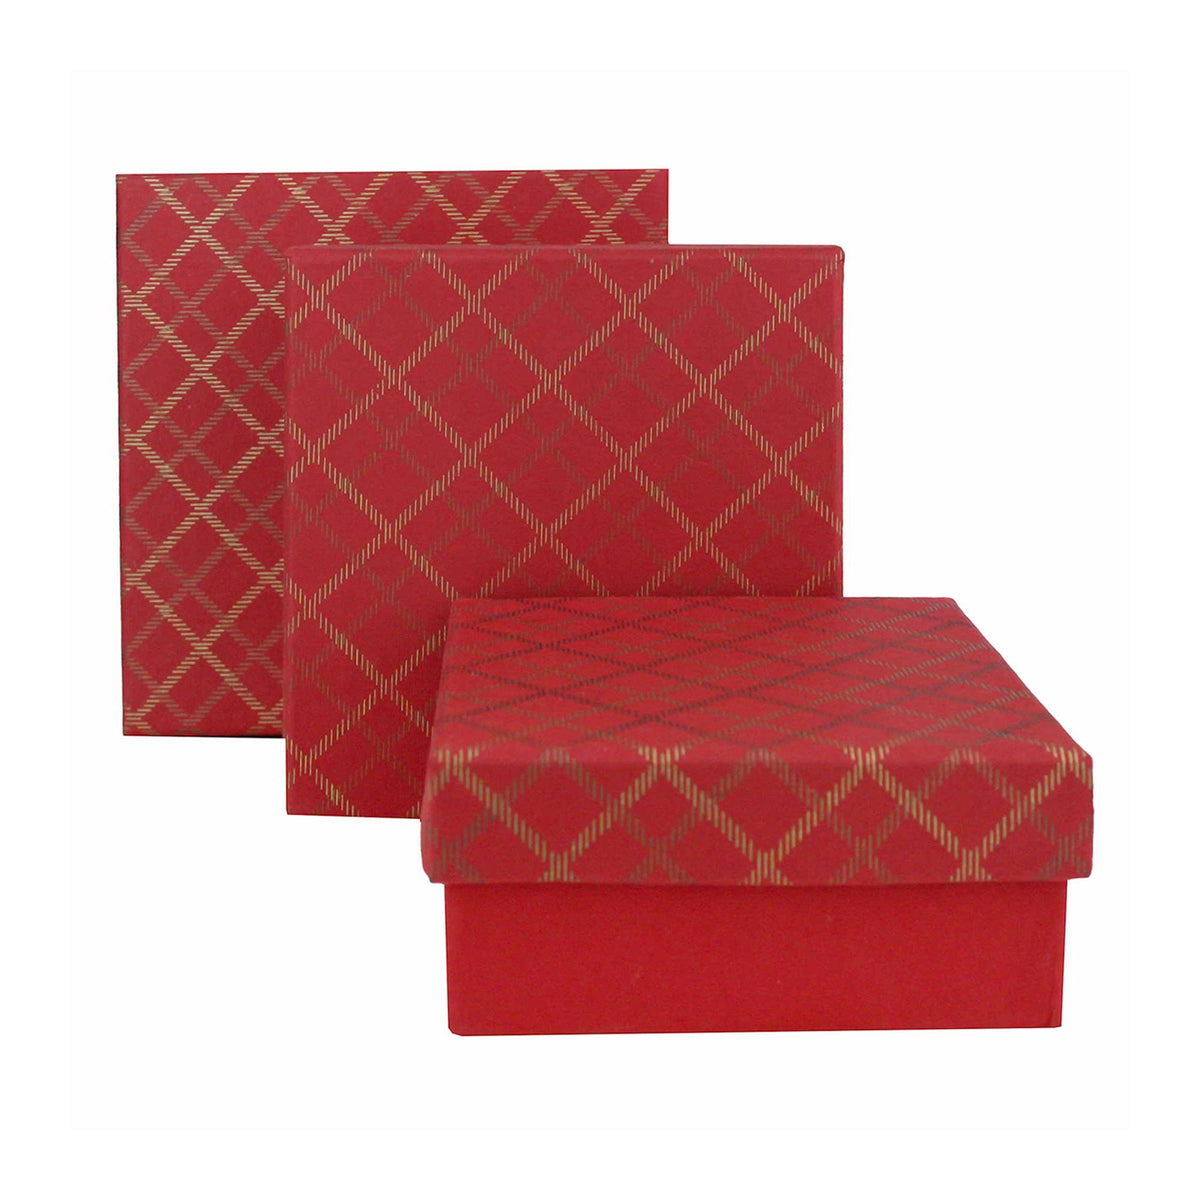 Set of 3 Handmade Red Chequered Gift Boxes